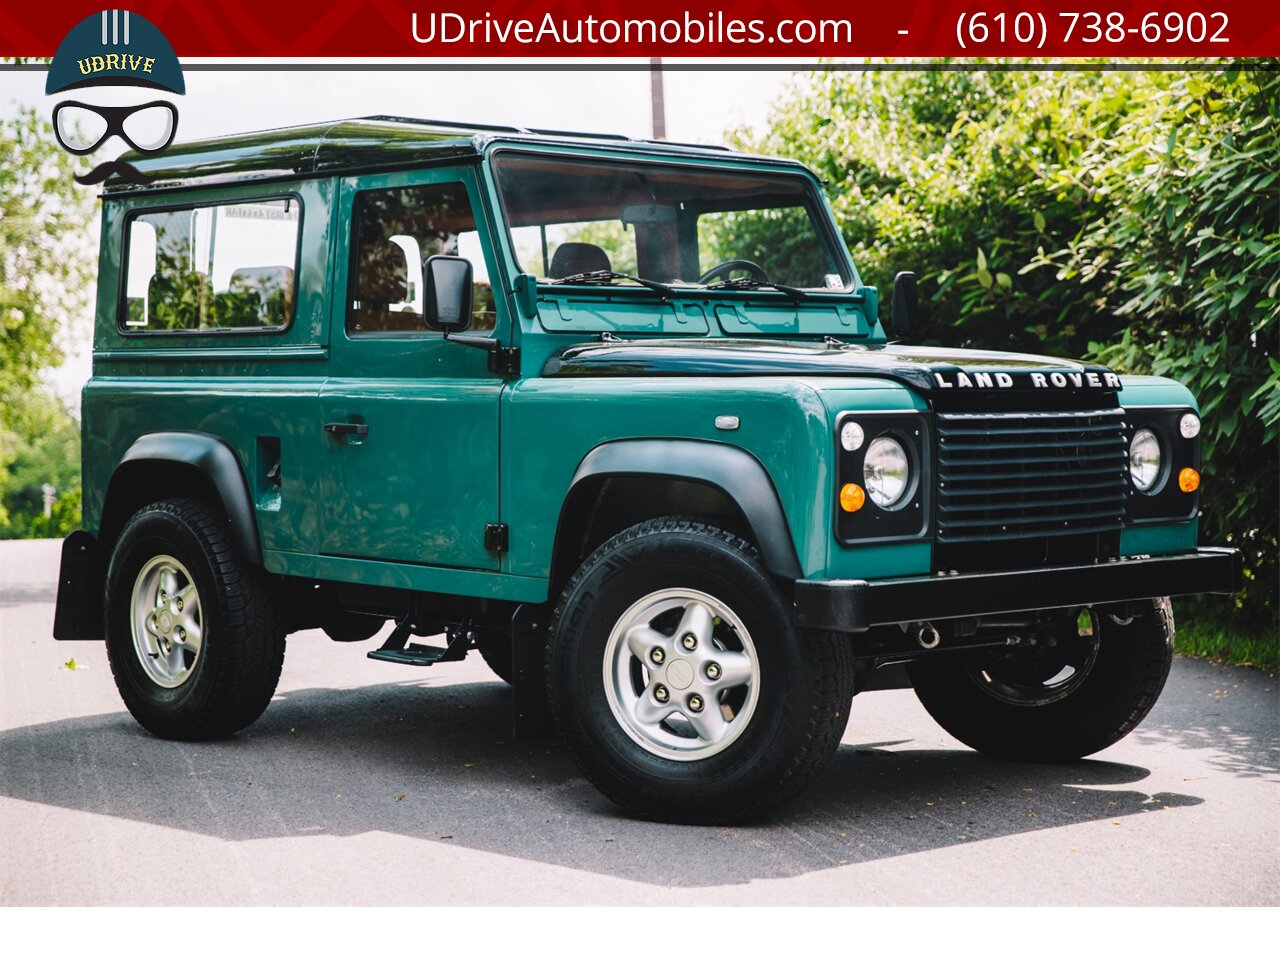 1986 Land Rover Defender 90 D90 4.0L V8 5 Speed Manual New Interior  $25k Recent Engine Build - Photo 3 - West Chester, PA 19382